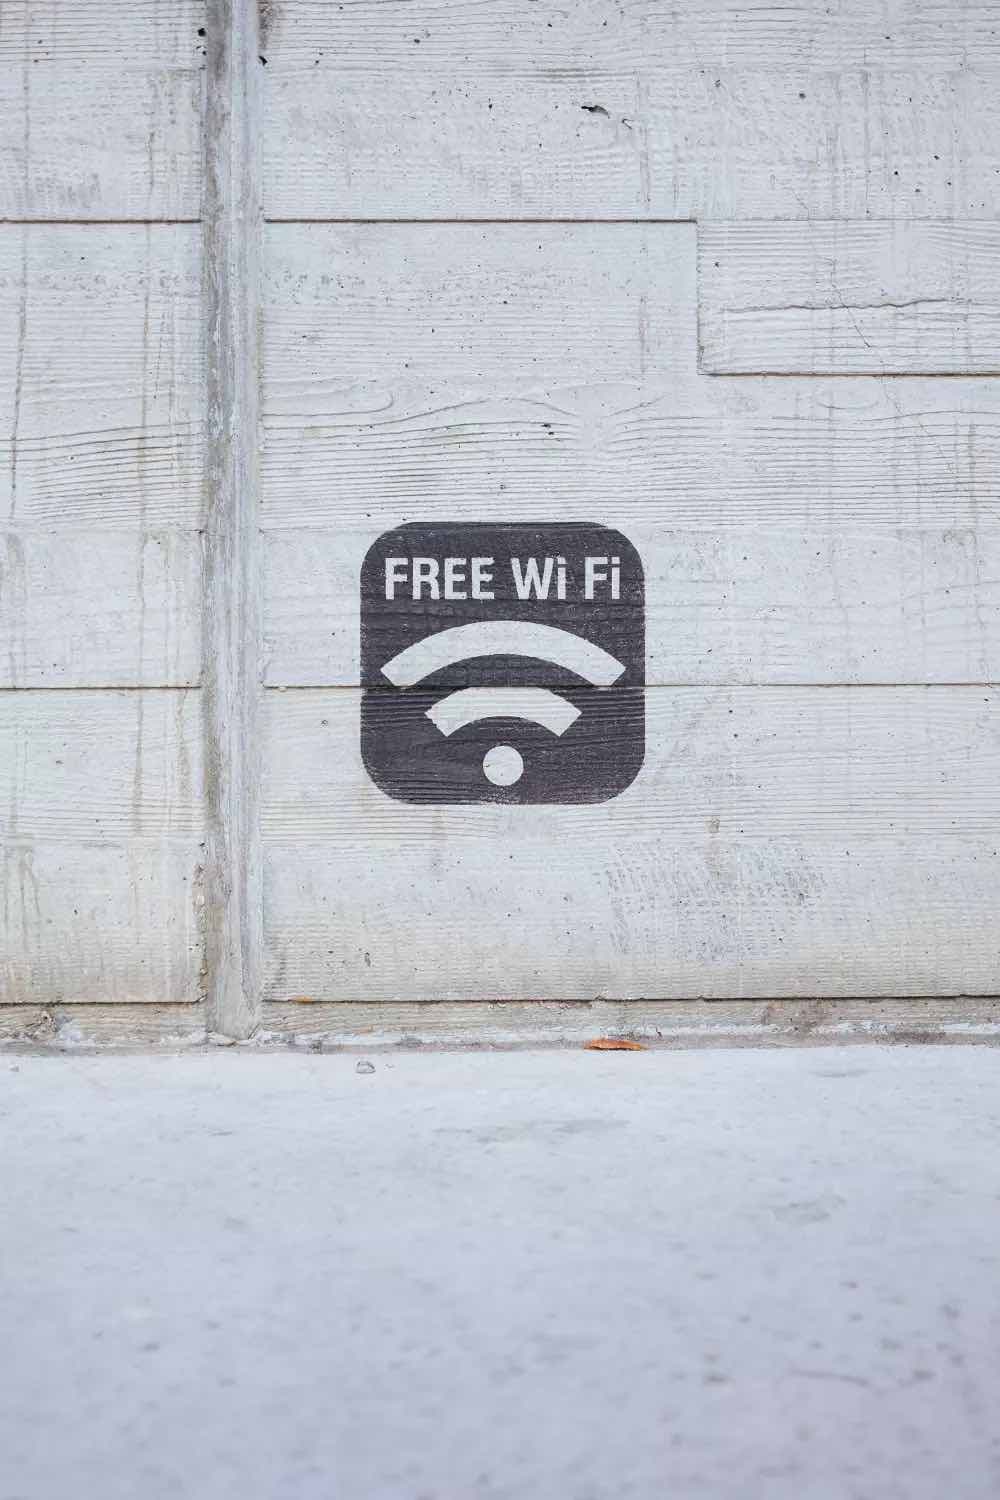 How to Share the Wi-Fi Password Easily to other devices